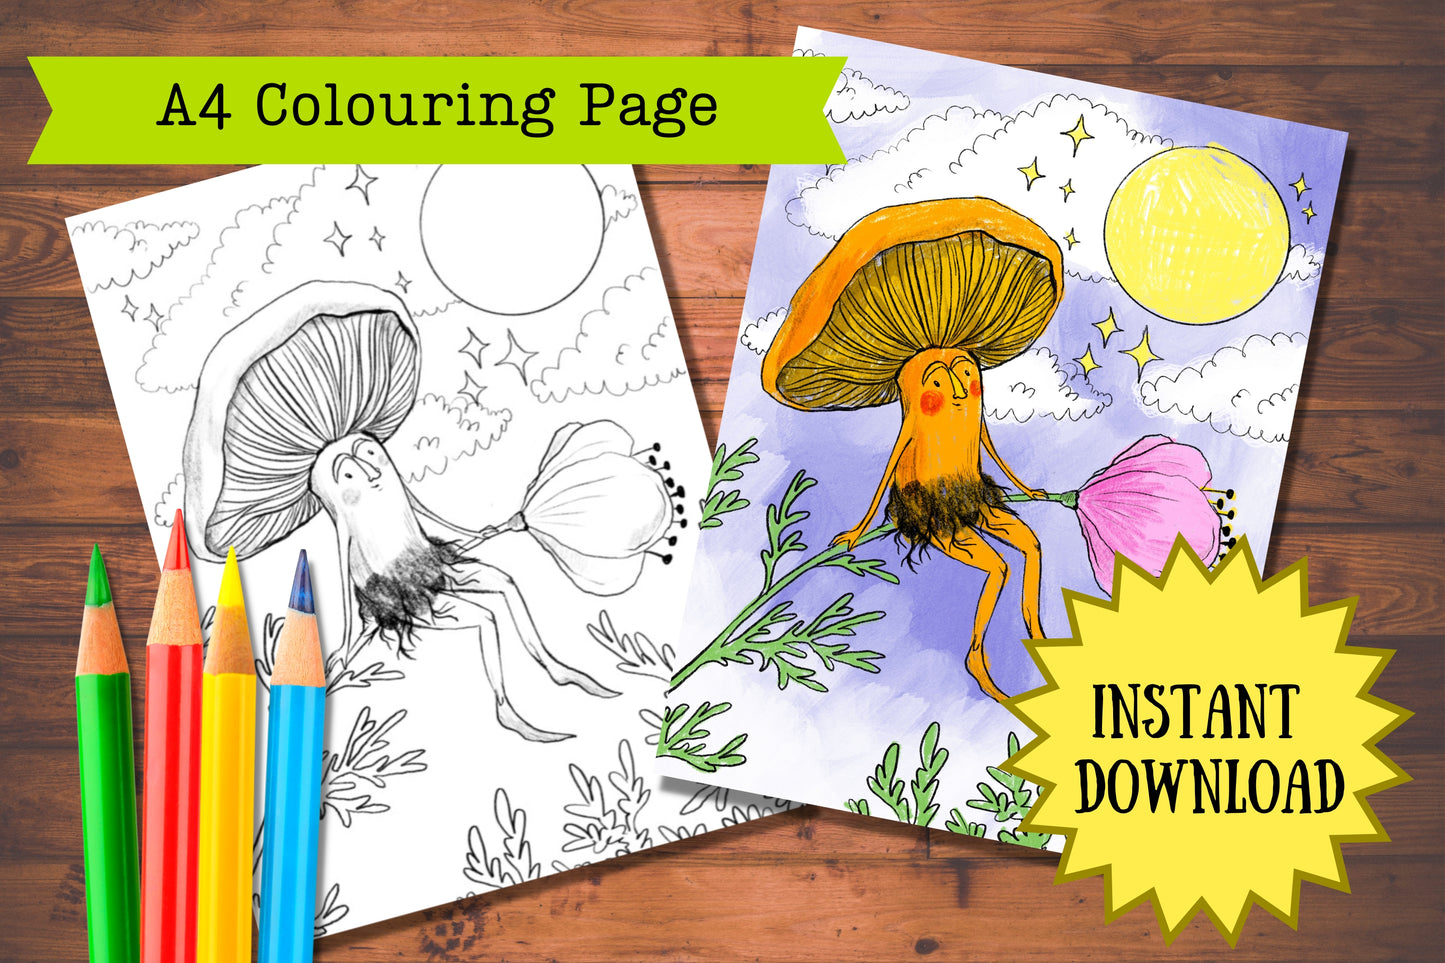 Anna Seed Art | Printable Colouring Page - Having a Think (DIGITAL DOWNLOAD)